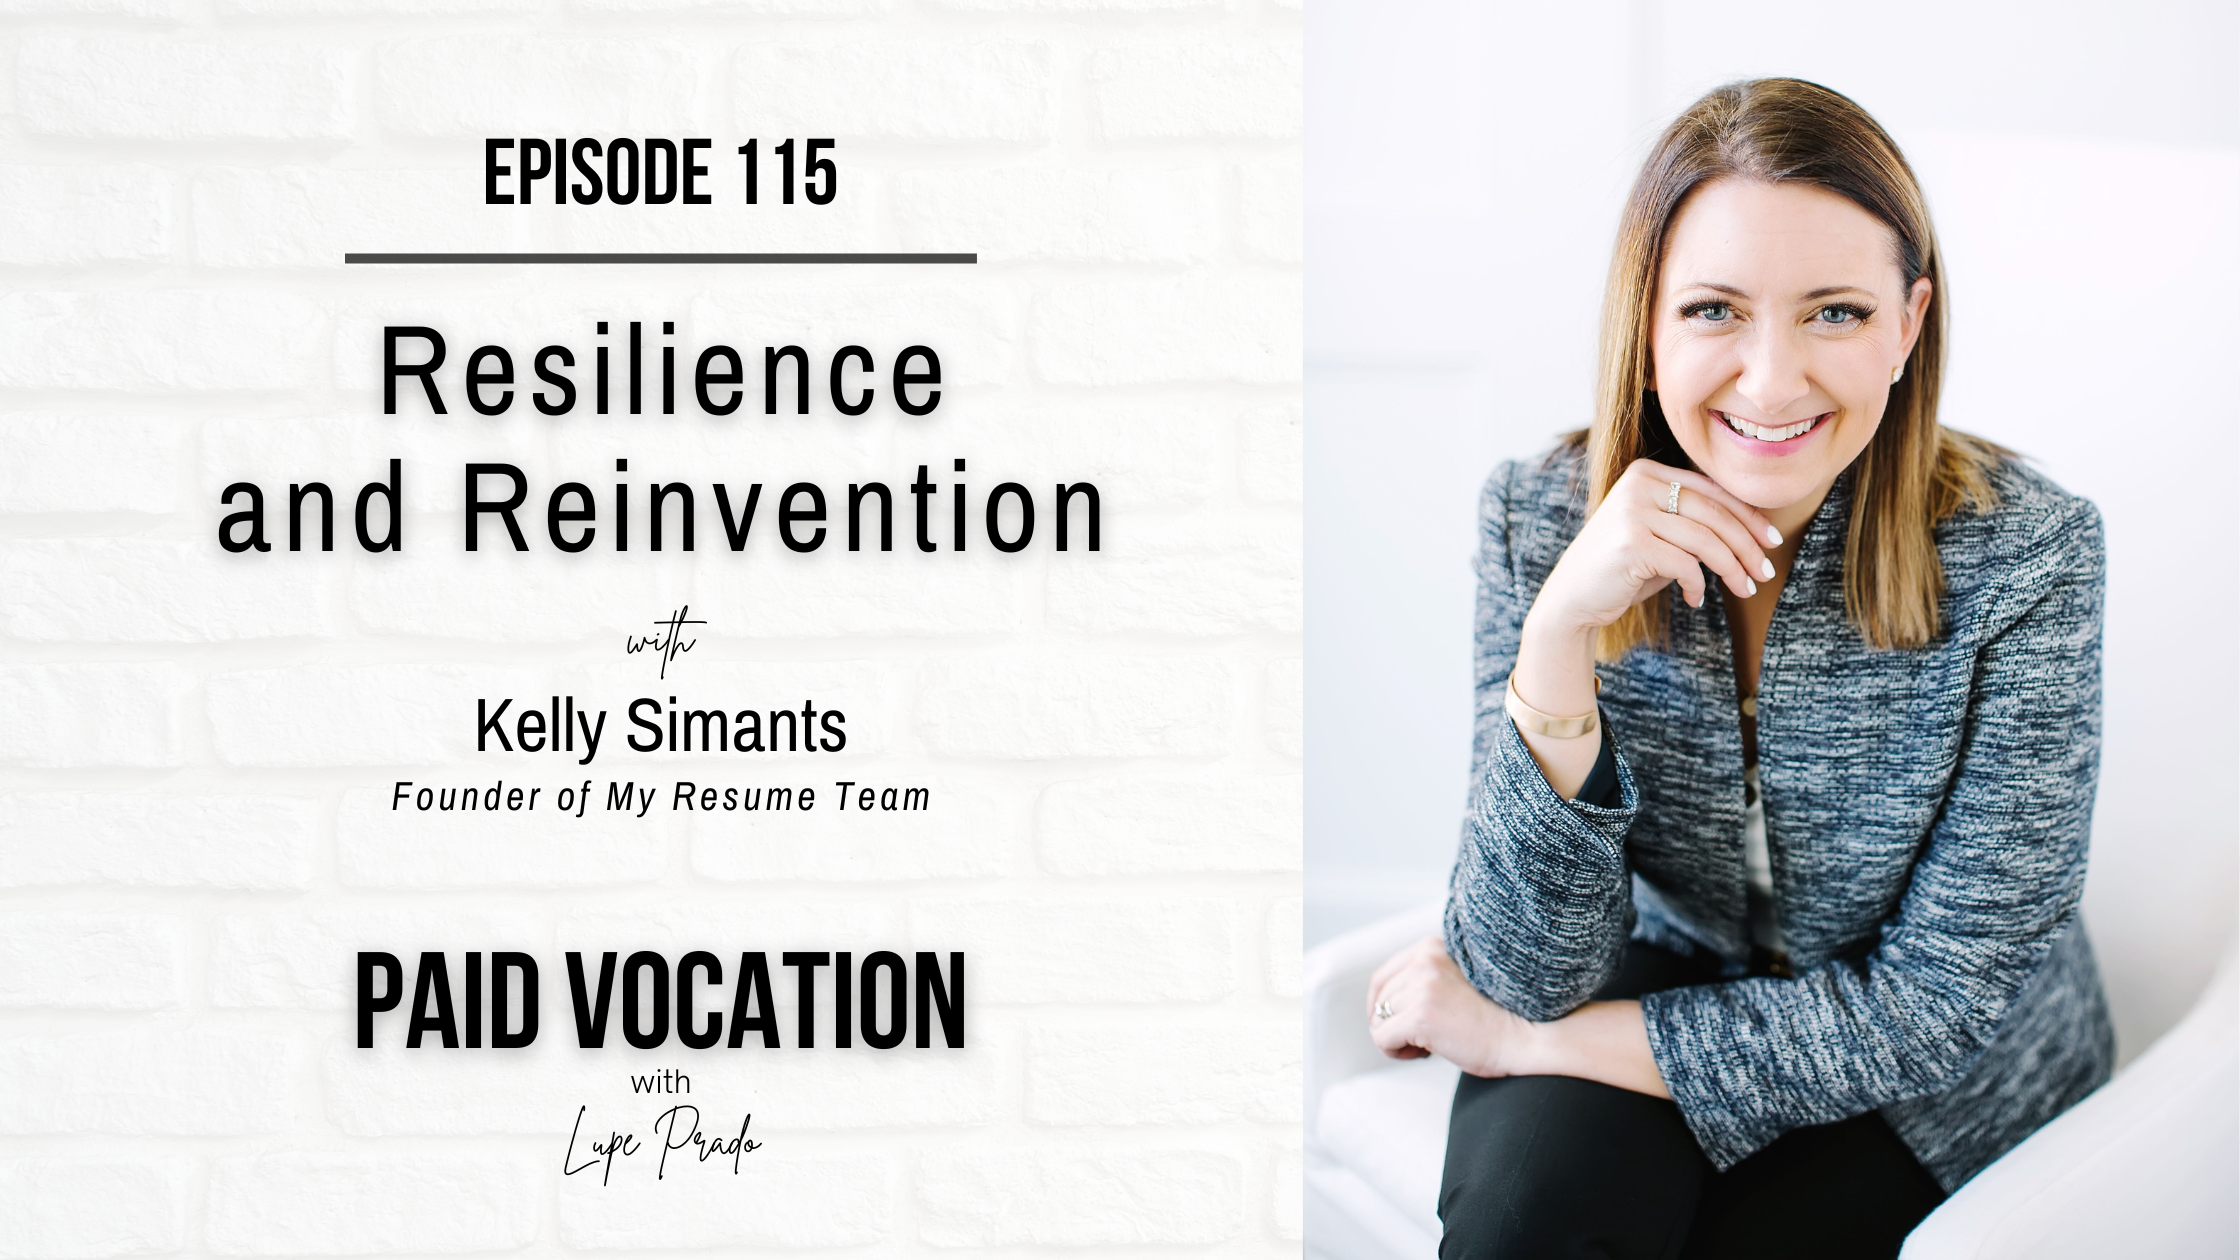 Resilience and Reinvention with Kelly Simants